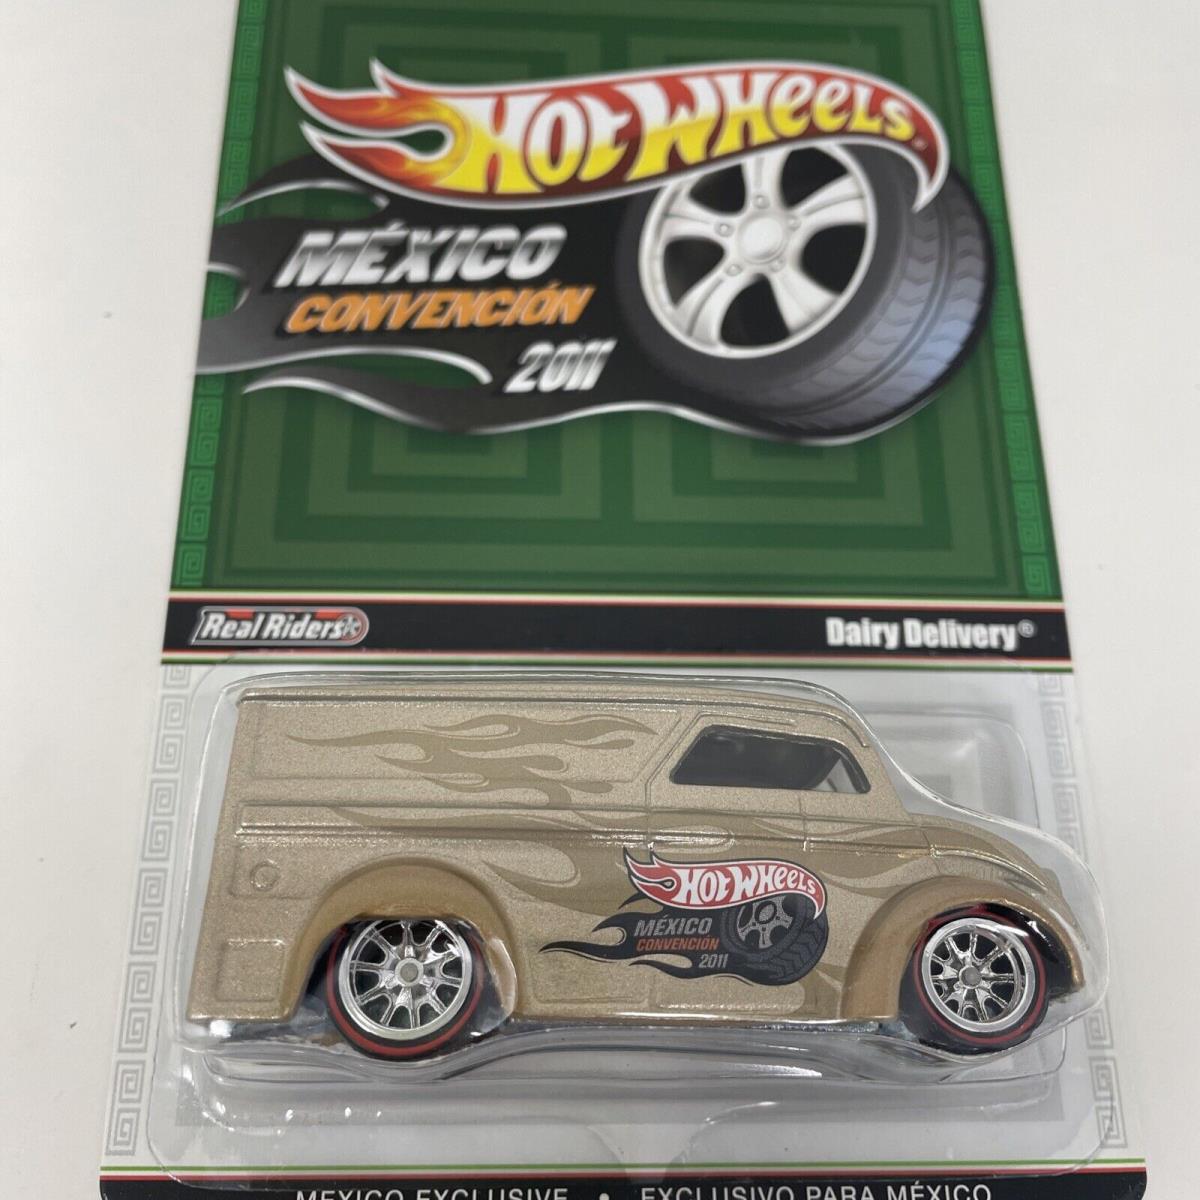 Hot Wheels 2011 Mexico Convention Dairy Delivery Redline Real Riders 3667 / 4000